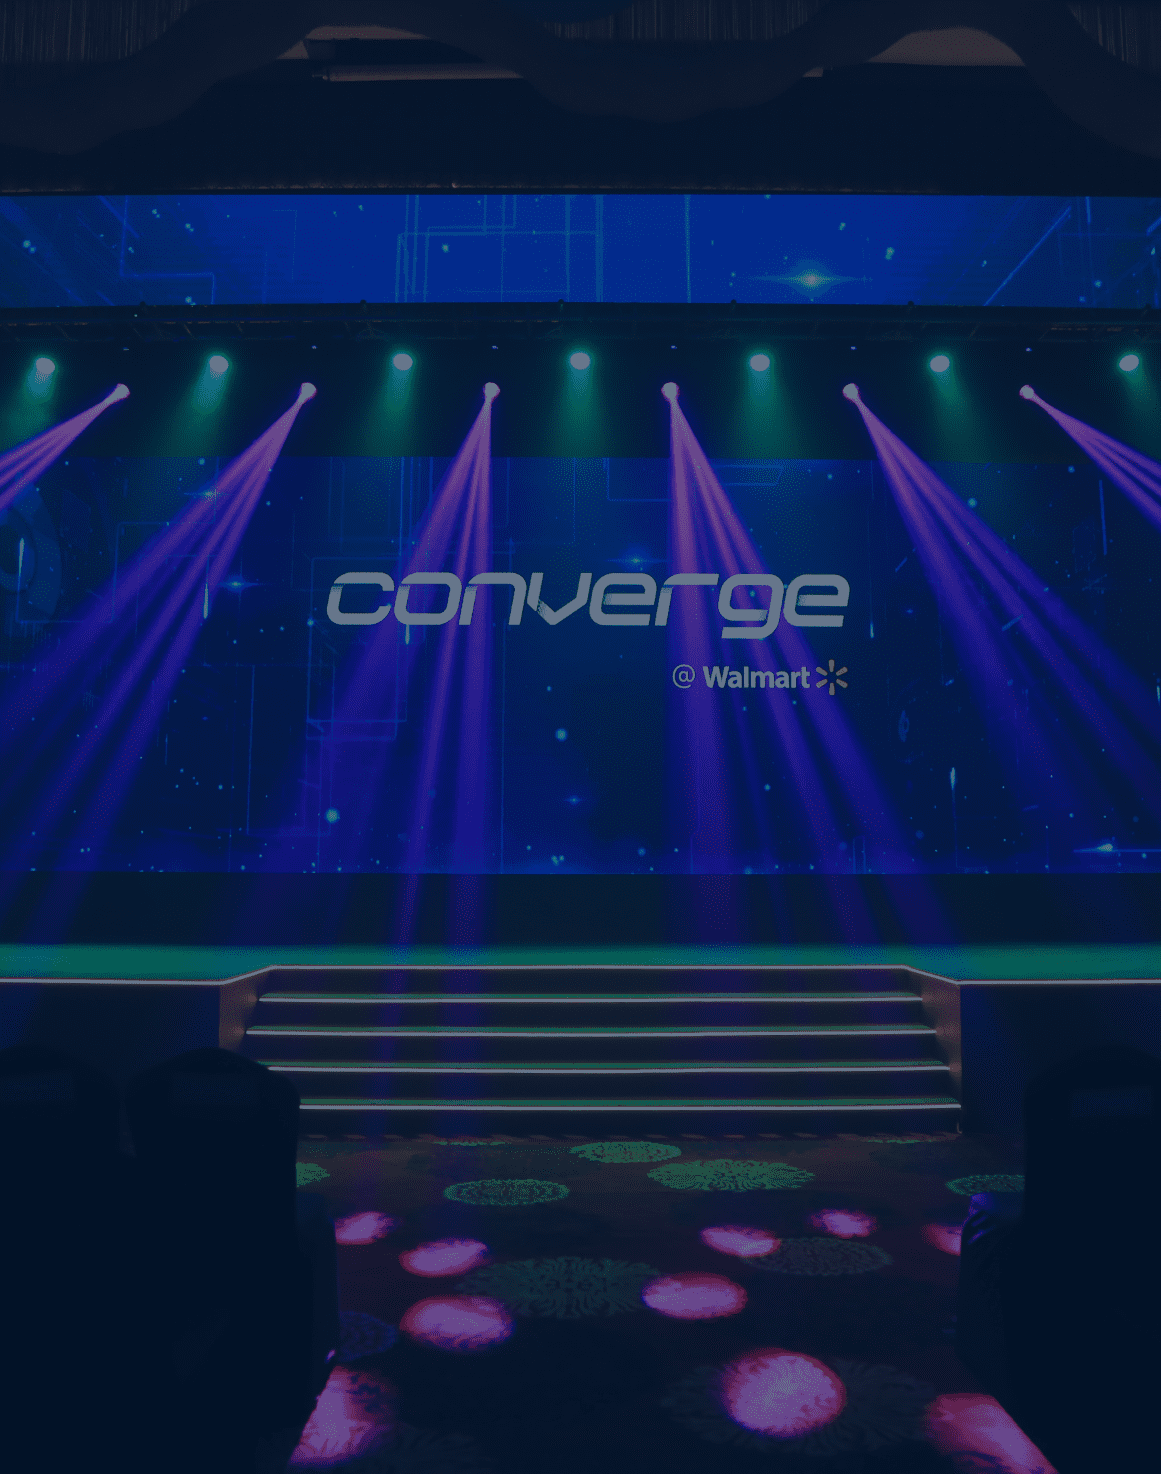 The stage setup for Converge @ Walmart, with purple light beams. In the center of the stage is a large screen which says ‘Converge @ Walmart’. On the left of the stage is a screen that says ‘Power the Present, Enable the Future’.